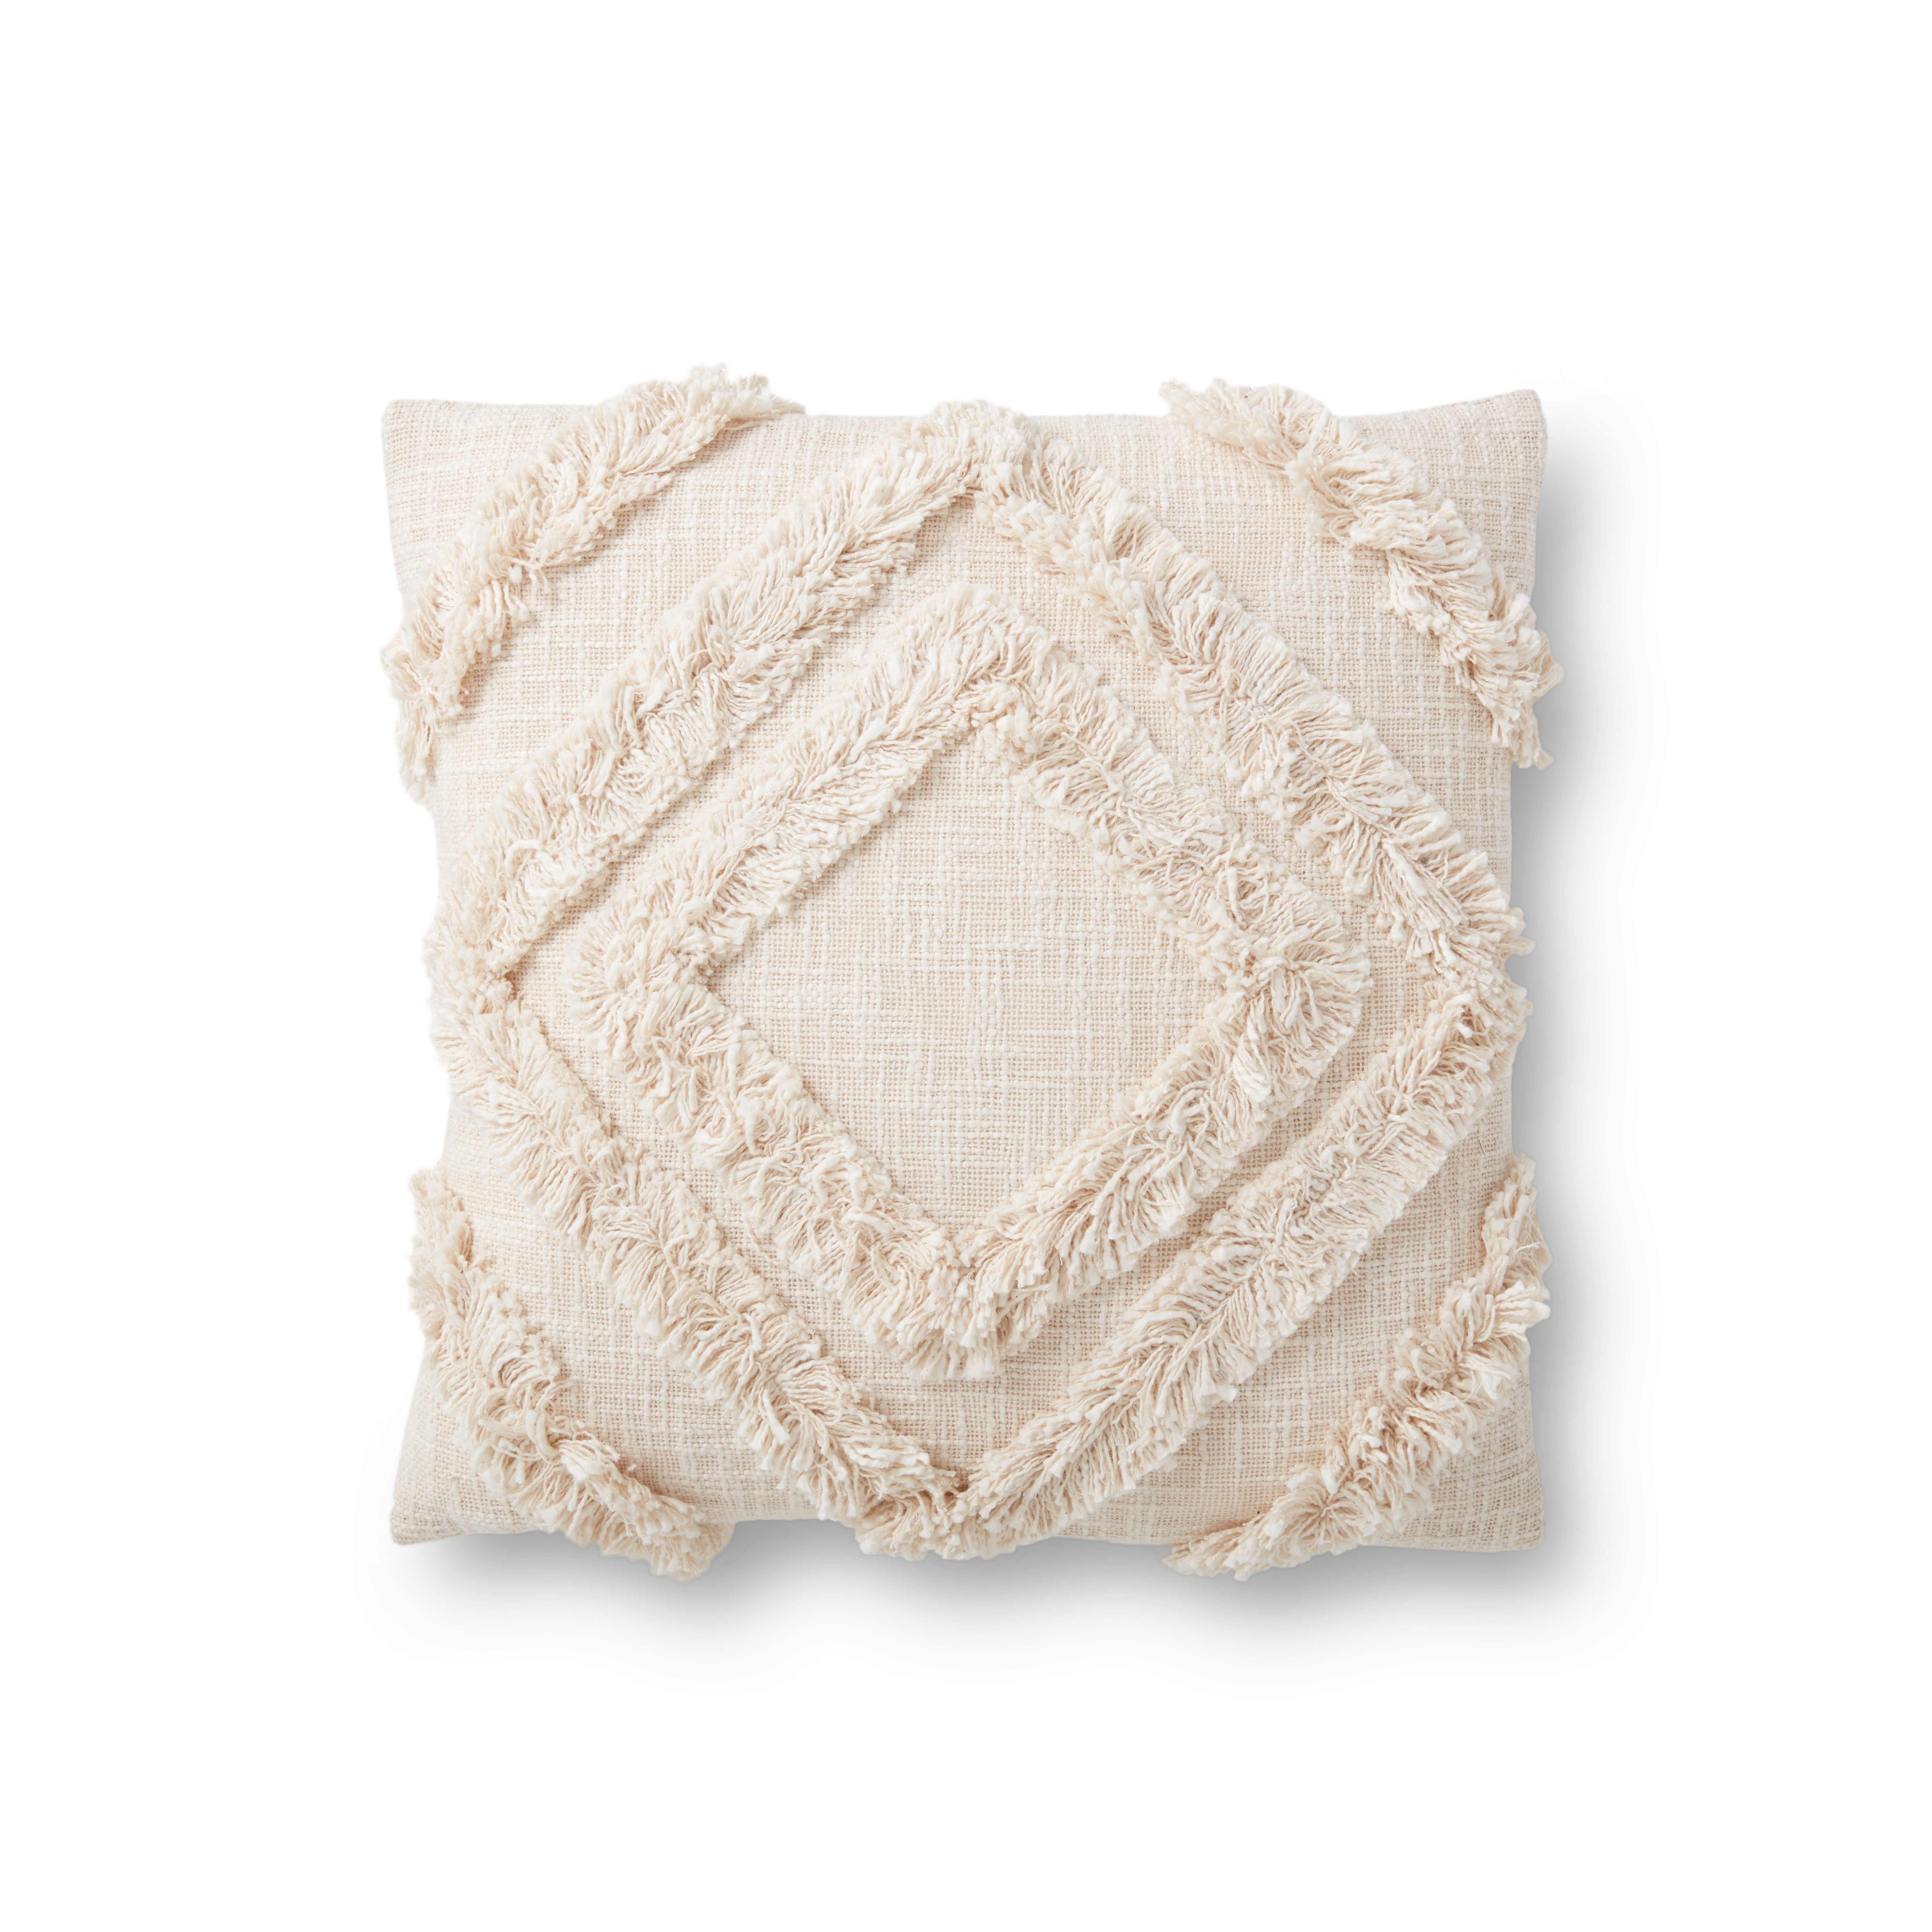 Magnolia Home by Joanna Gaines x Loloi Pillows PMH0009 Cream 18" x 18" Cover Only - Loloi Rugs